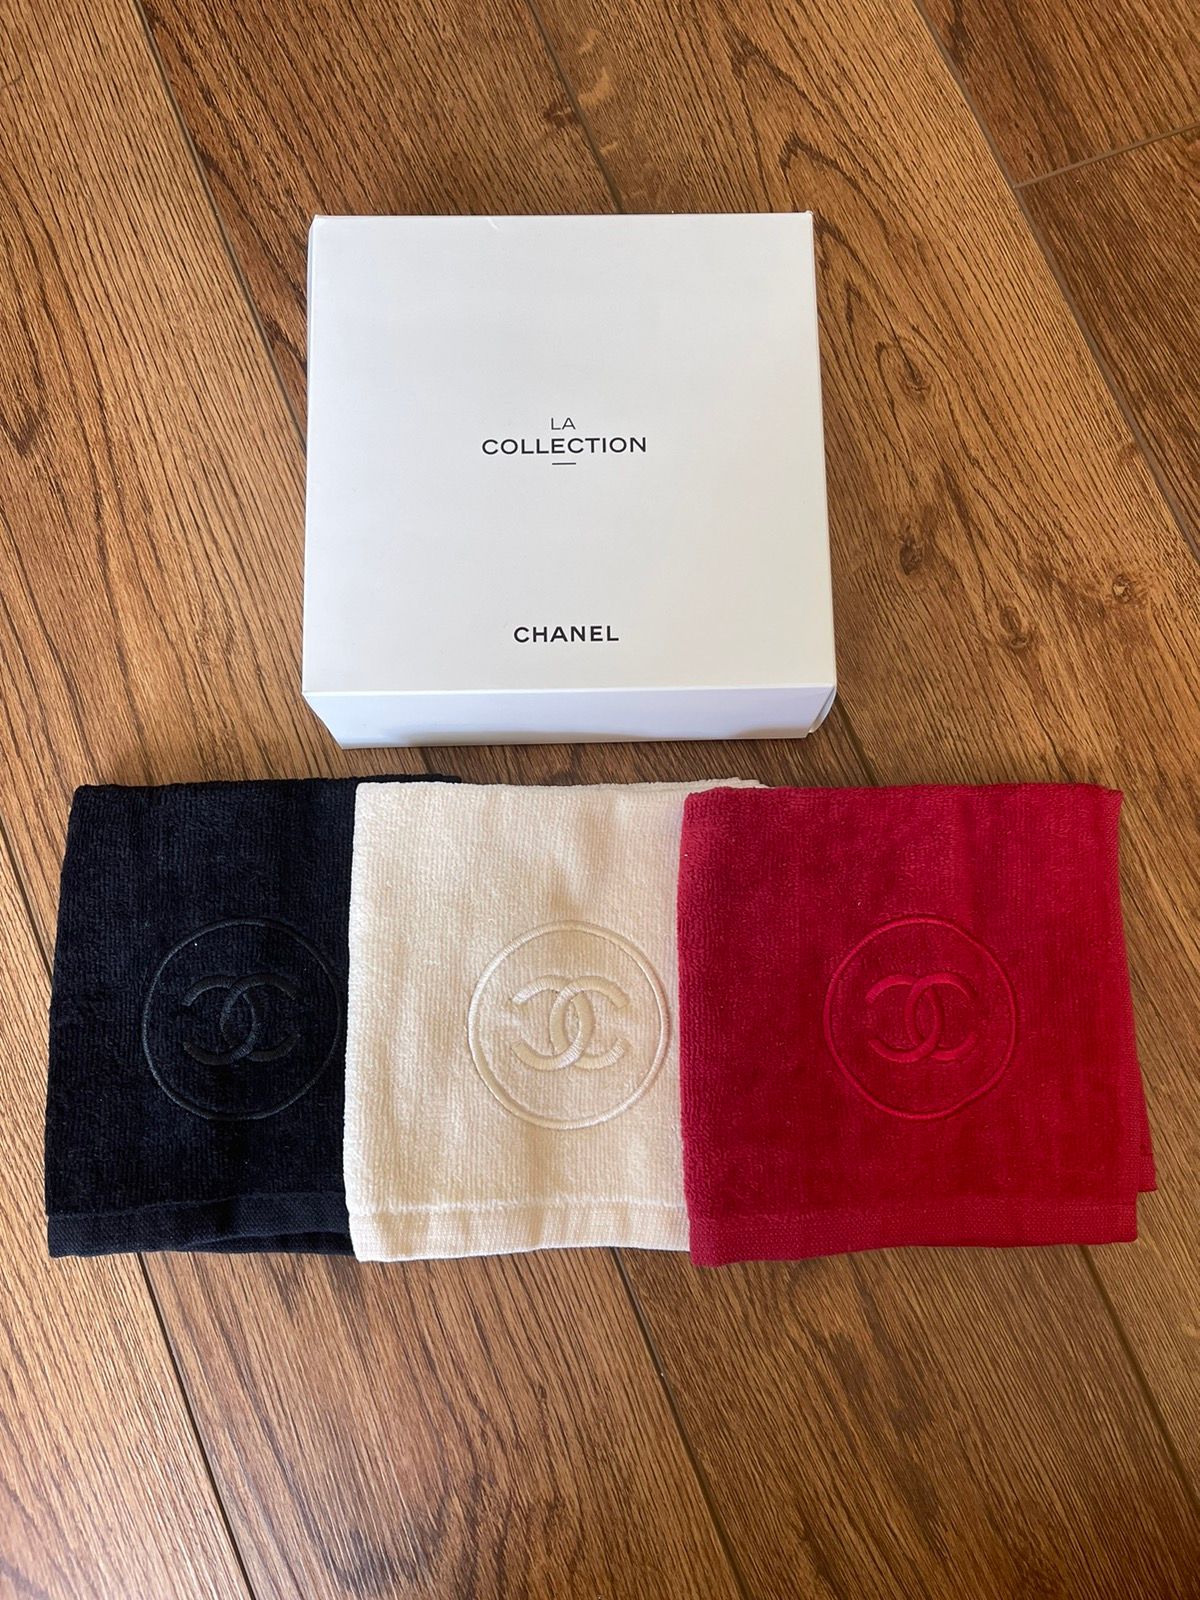 Chanel Chanel Hand Towels Set of 3